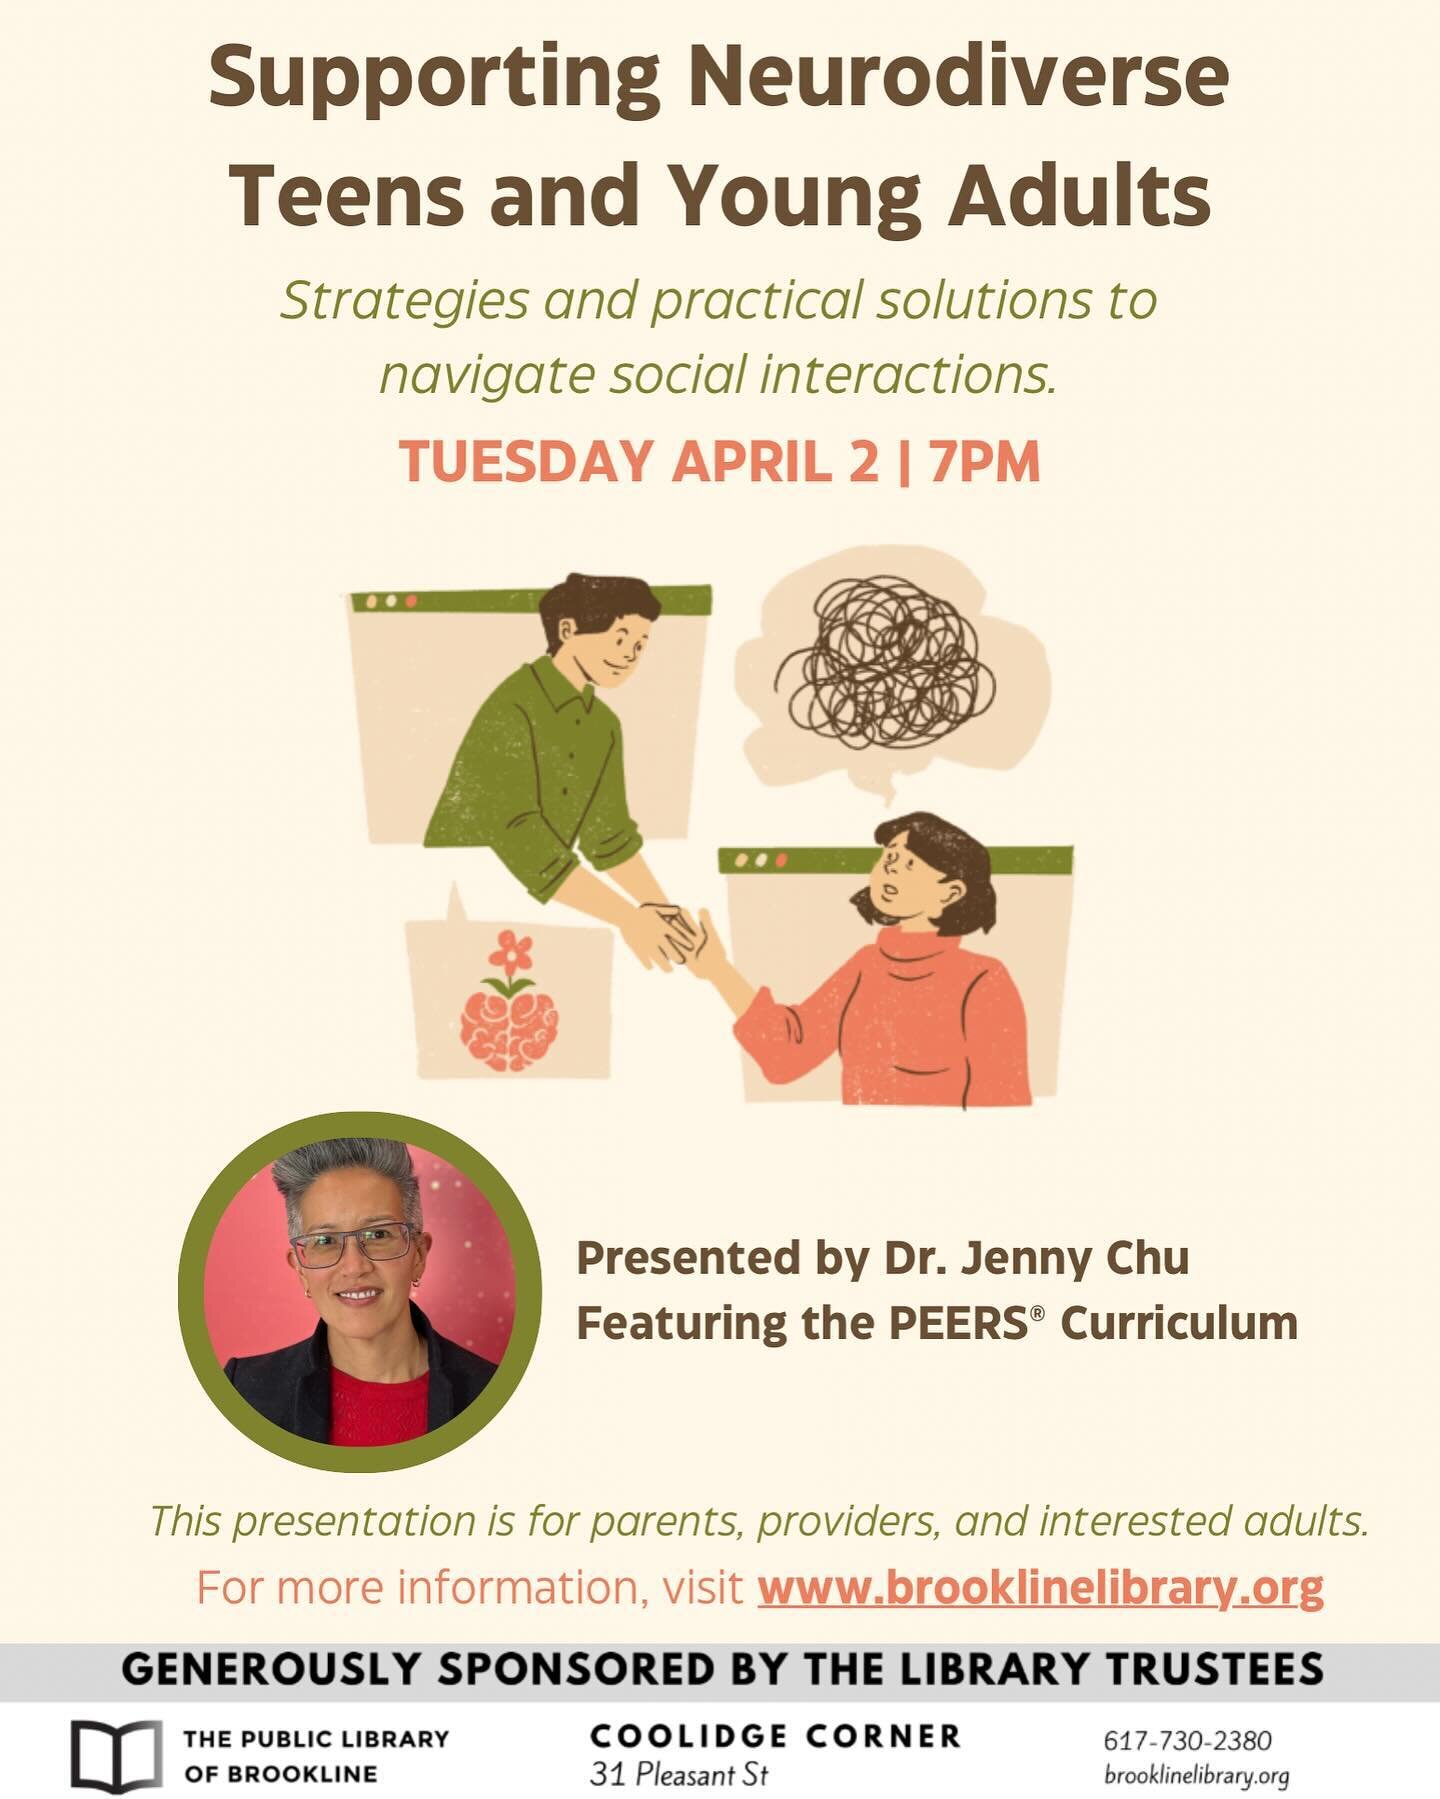 SAVE THE DATE! 

Dr. Chu is presenting &ldquo;Addressing the Social Skills Challenges of Neurodiverse Teens and Youngs Adults&rdquo; at the Brookline Public Library on Tuesday April 2!

For more information, visit www.brooklinelibrary.org